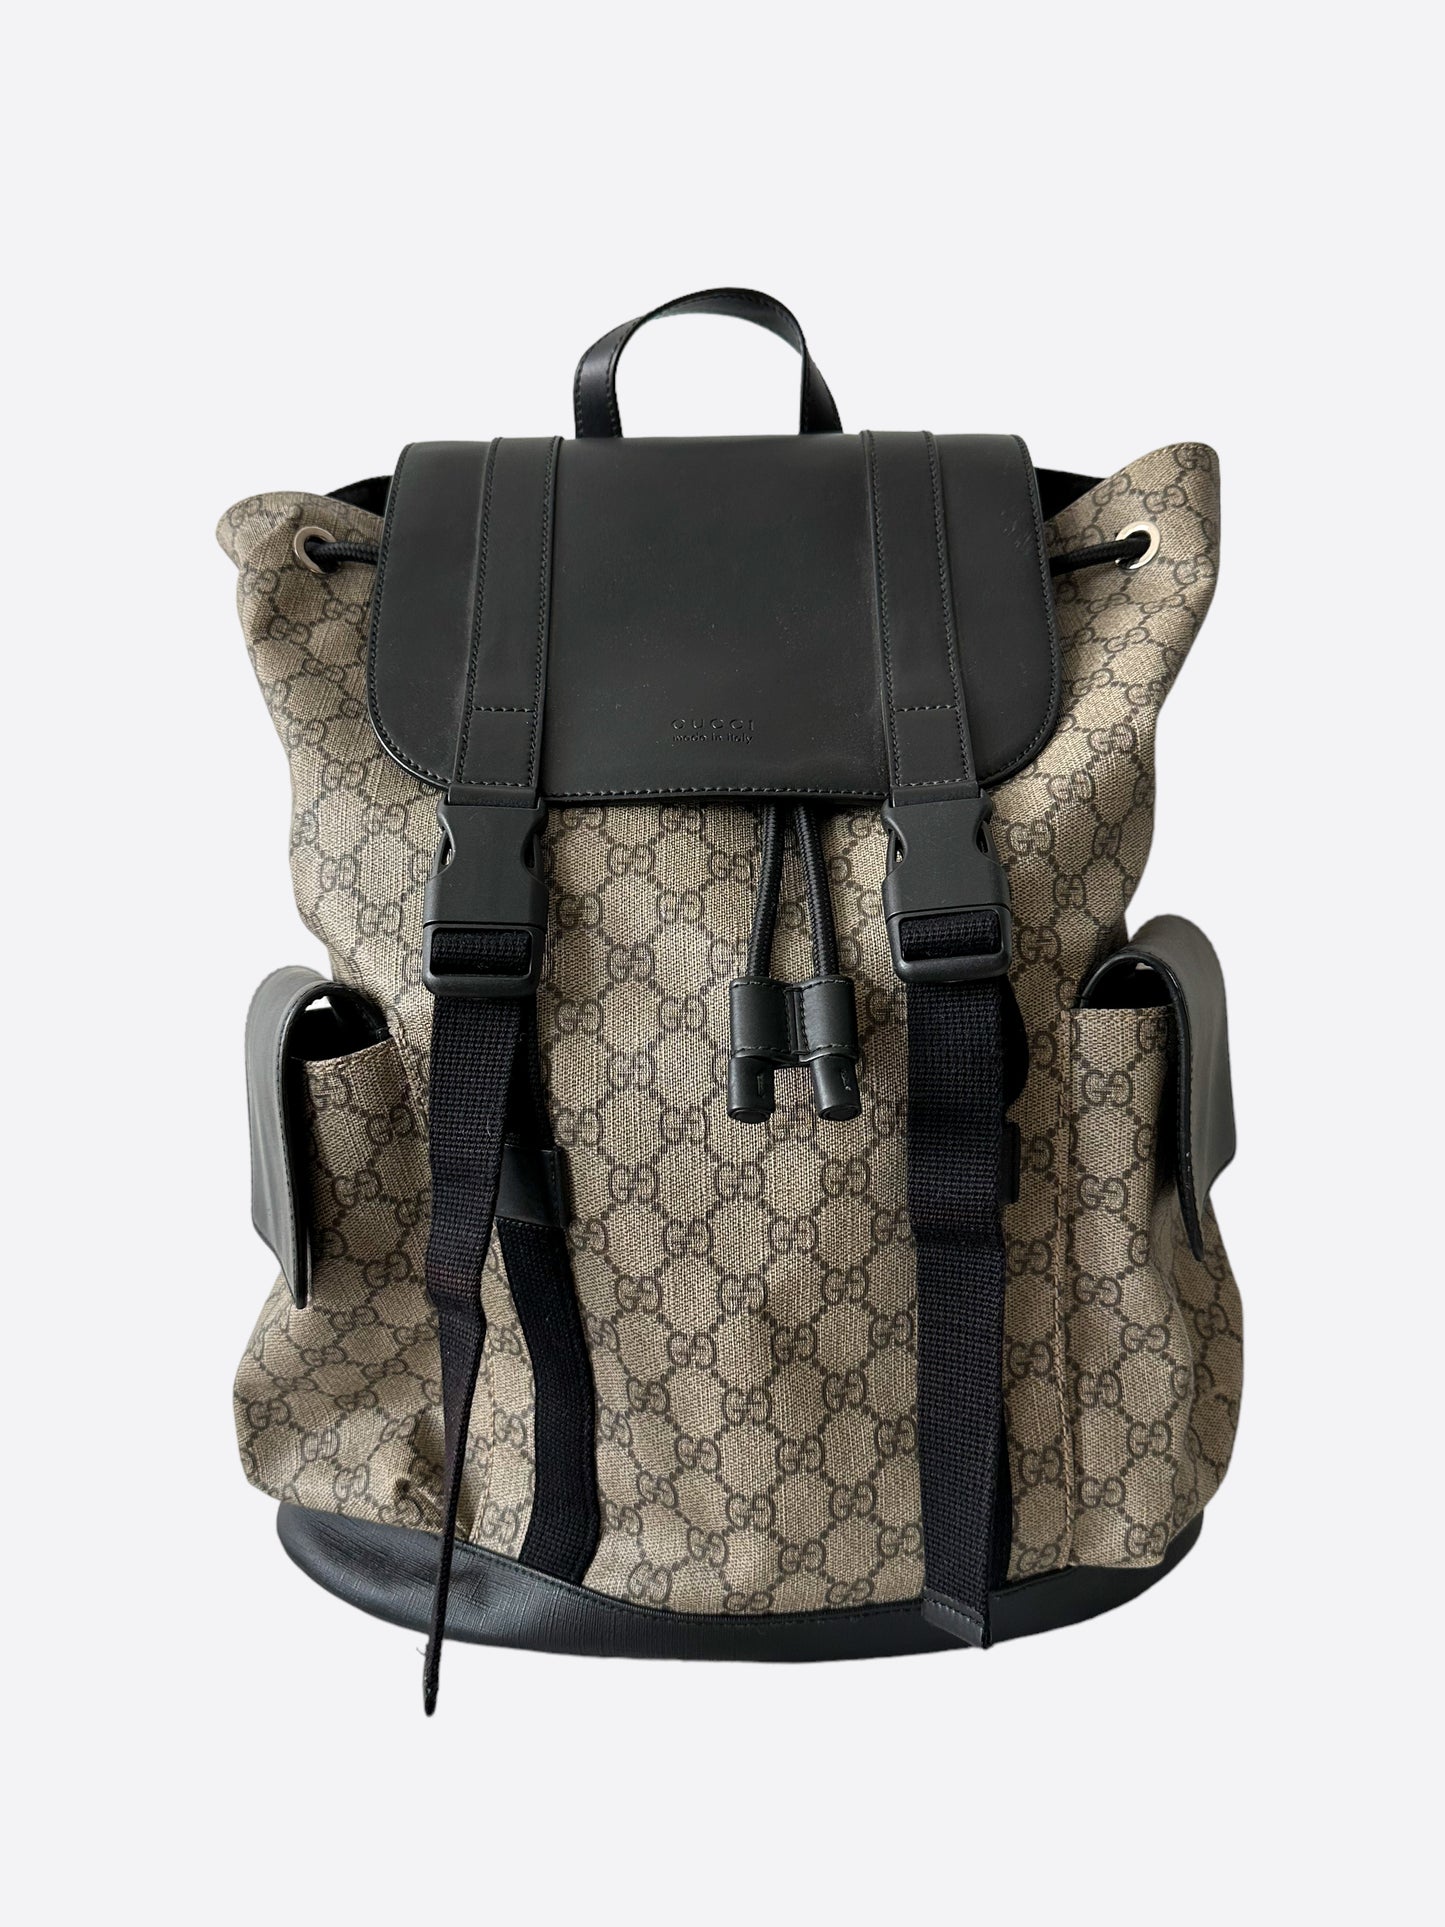 Python backpack with Double G in beige and black